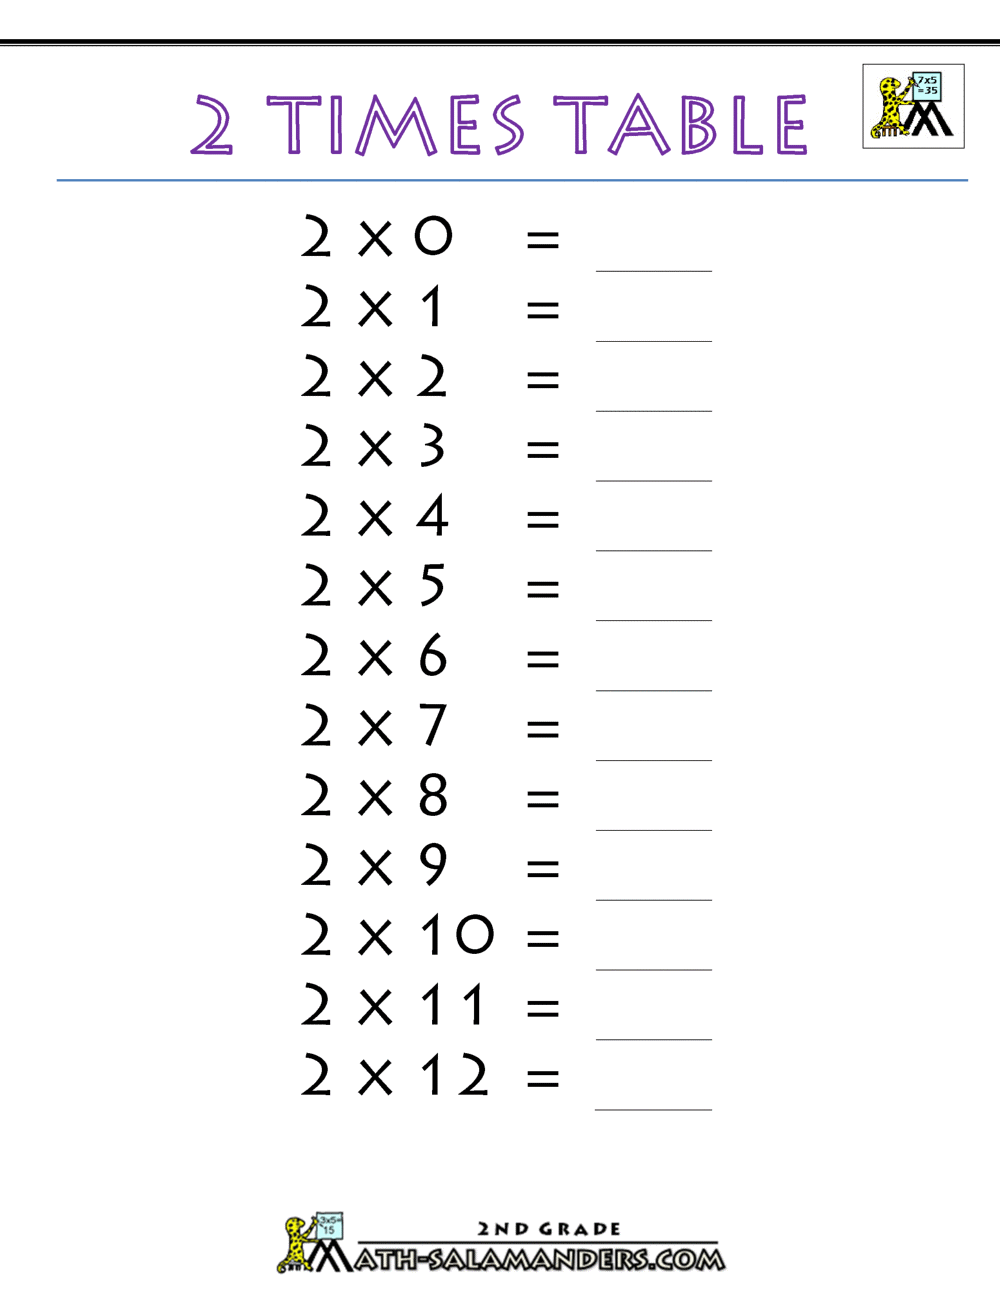 25 Times Table Inside 2 Times Table Worksheet